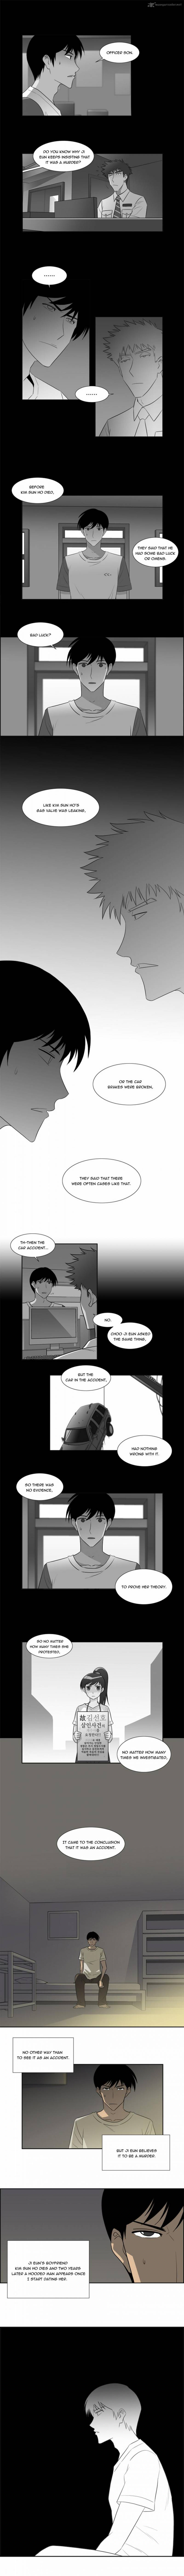 Melo Holic Chapter 31 Page 4